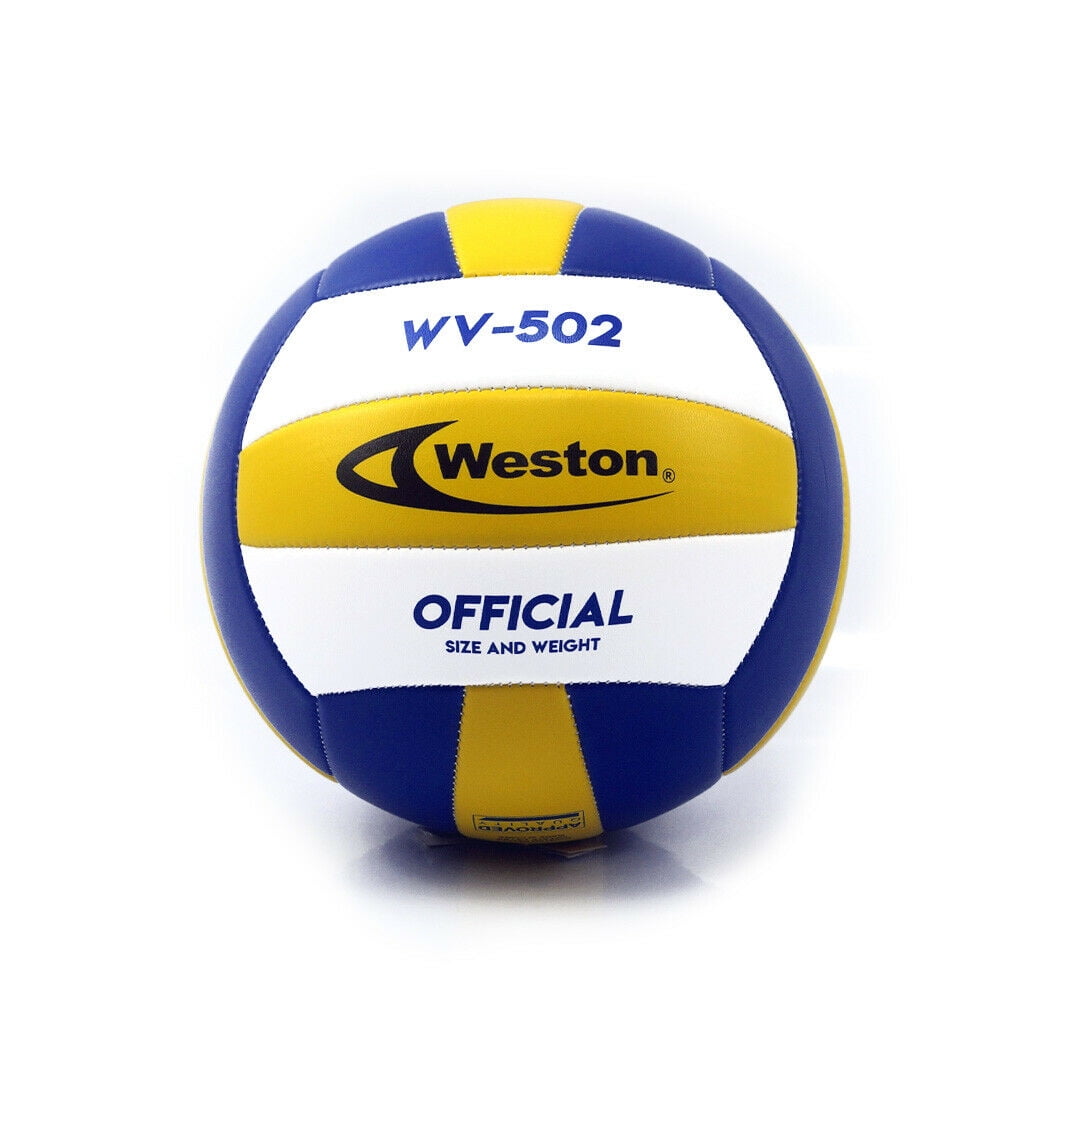 Weston WV502 Soft Touch Recreational Volleyball official size 